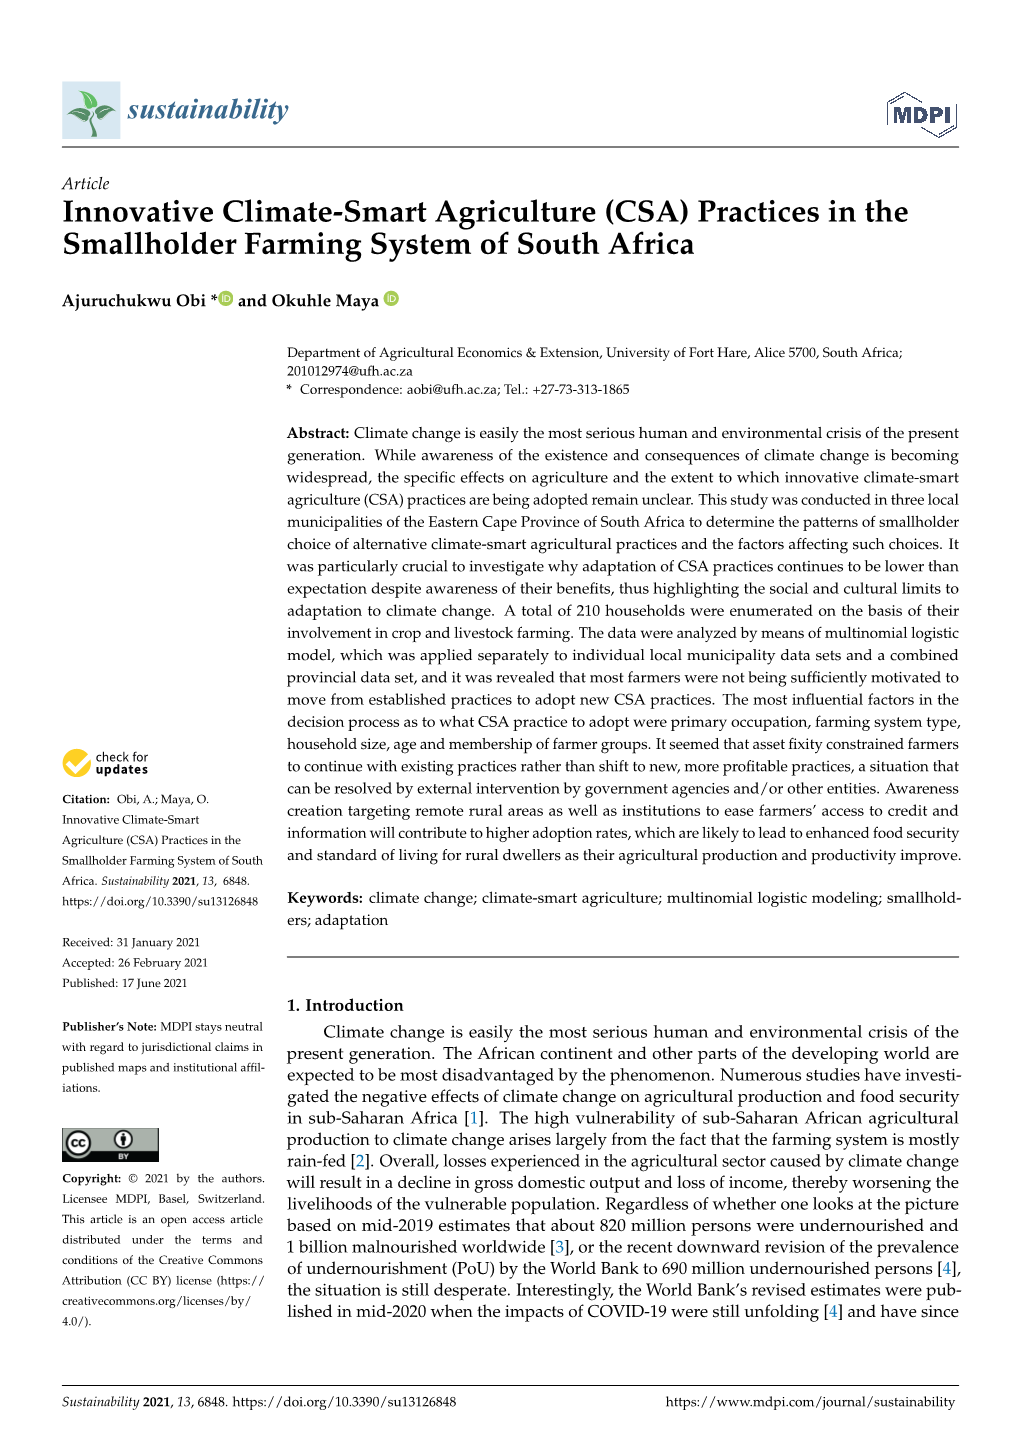 Innovative Climate-Smart Agriculture (CSA) Practices in the Smallholder Farming System of South Africa